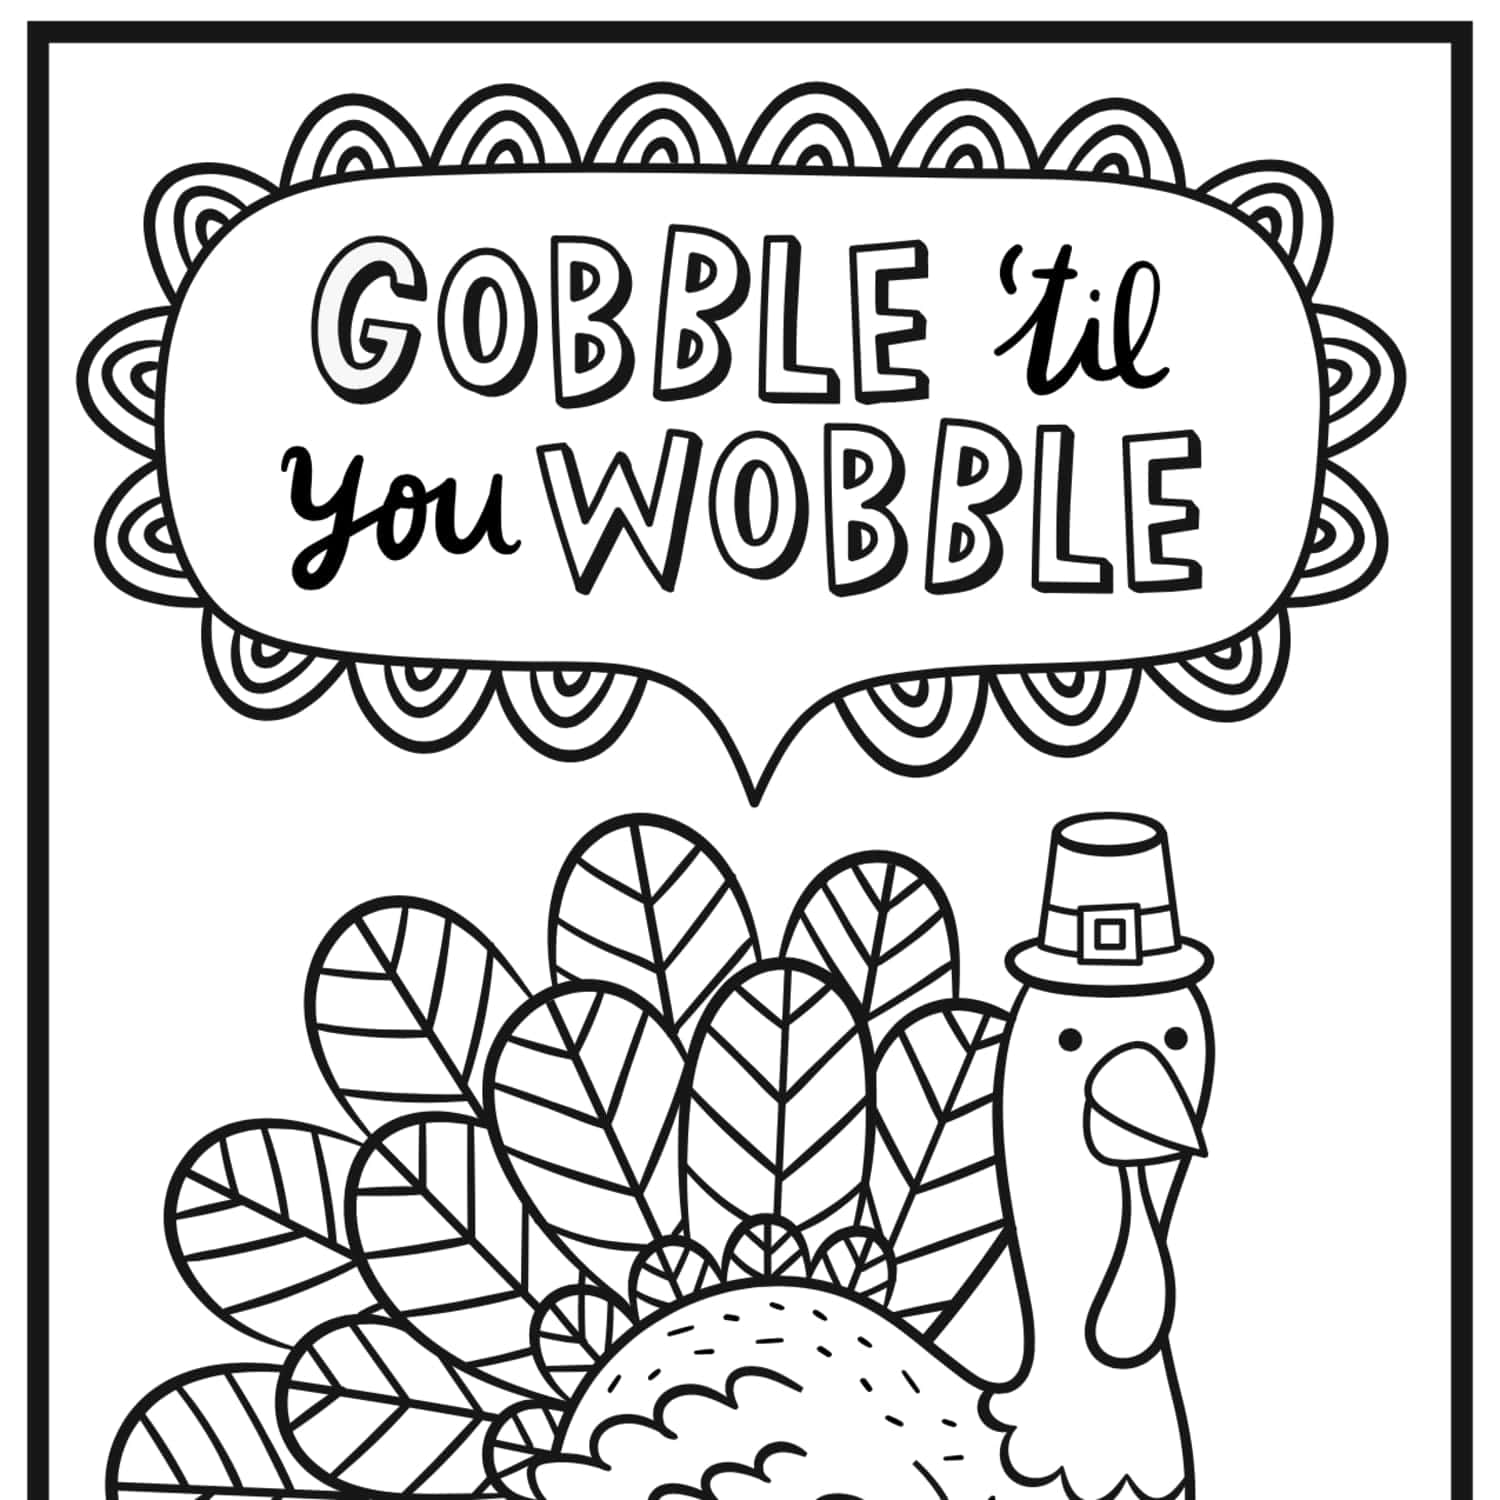 Explore the world of Turkey with this free printable Turkey Coloring Sheet